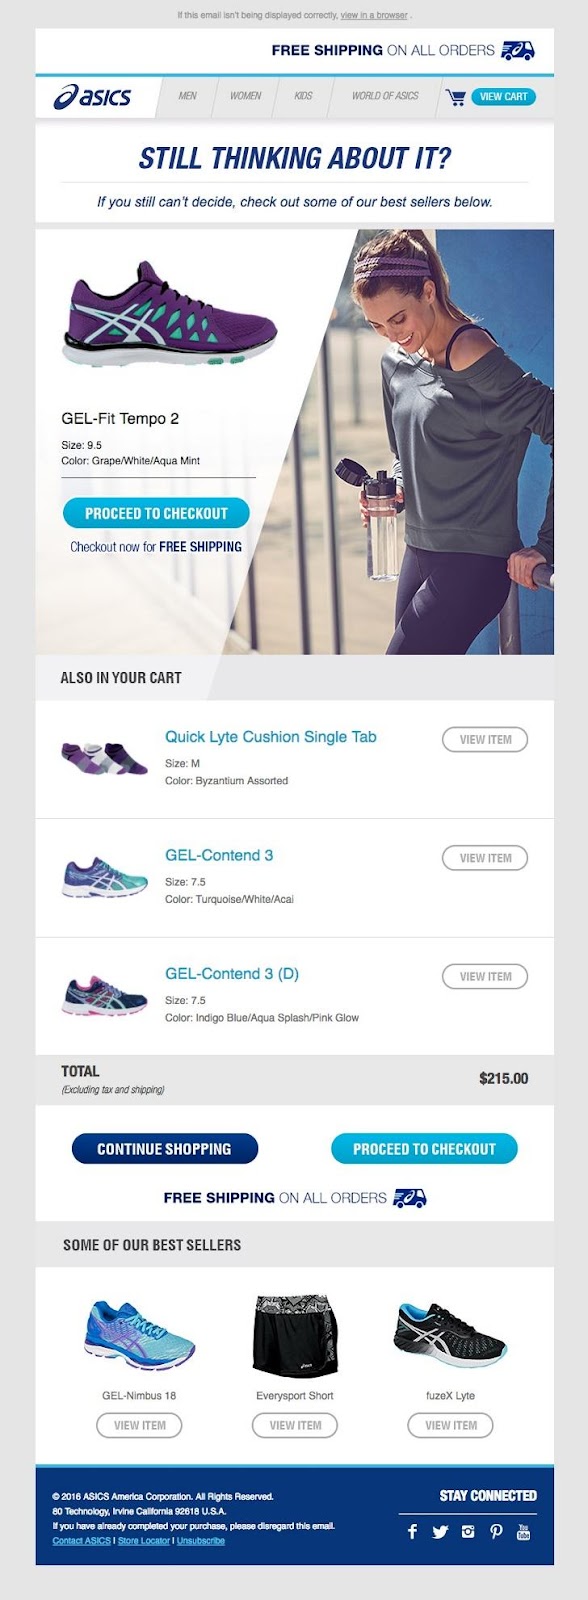 asics-personalized-email-example